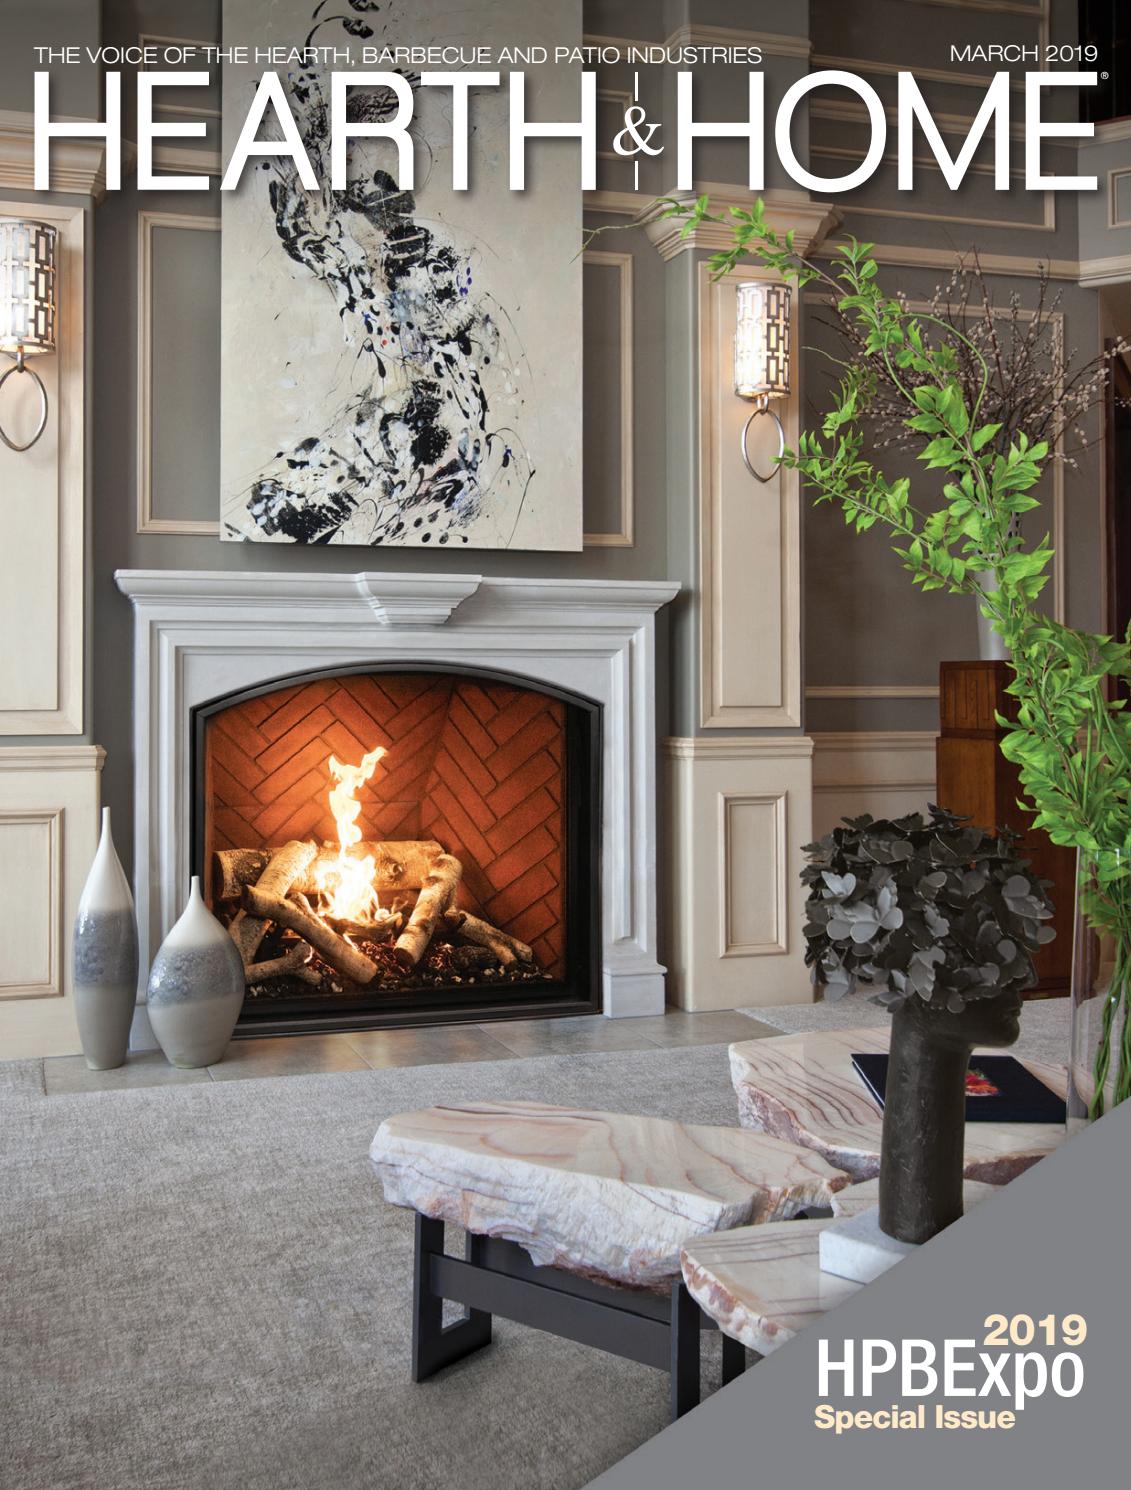 Country Comfort Fireplace Insert Fresh Hearth & Home Magazine – 2019 March issue by Hearth & Home